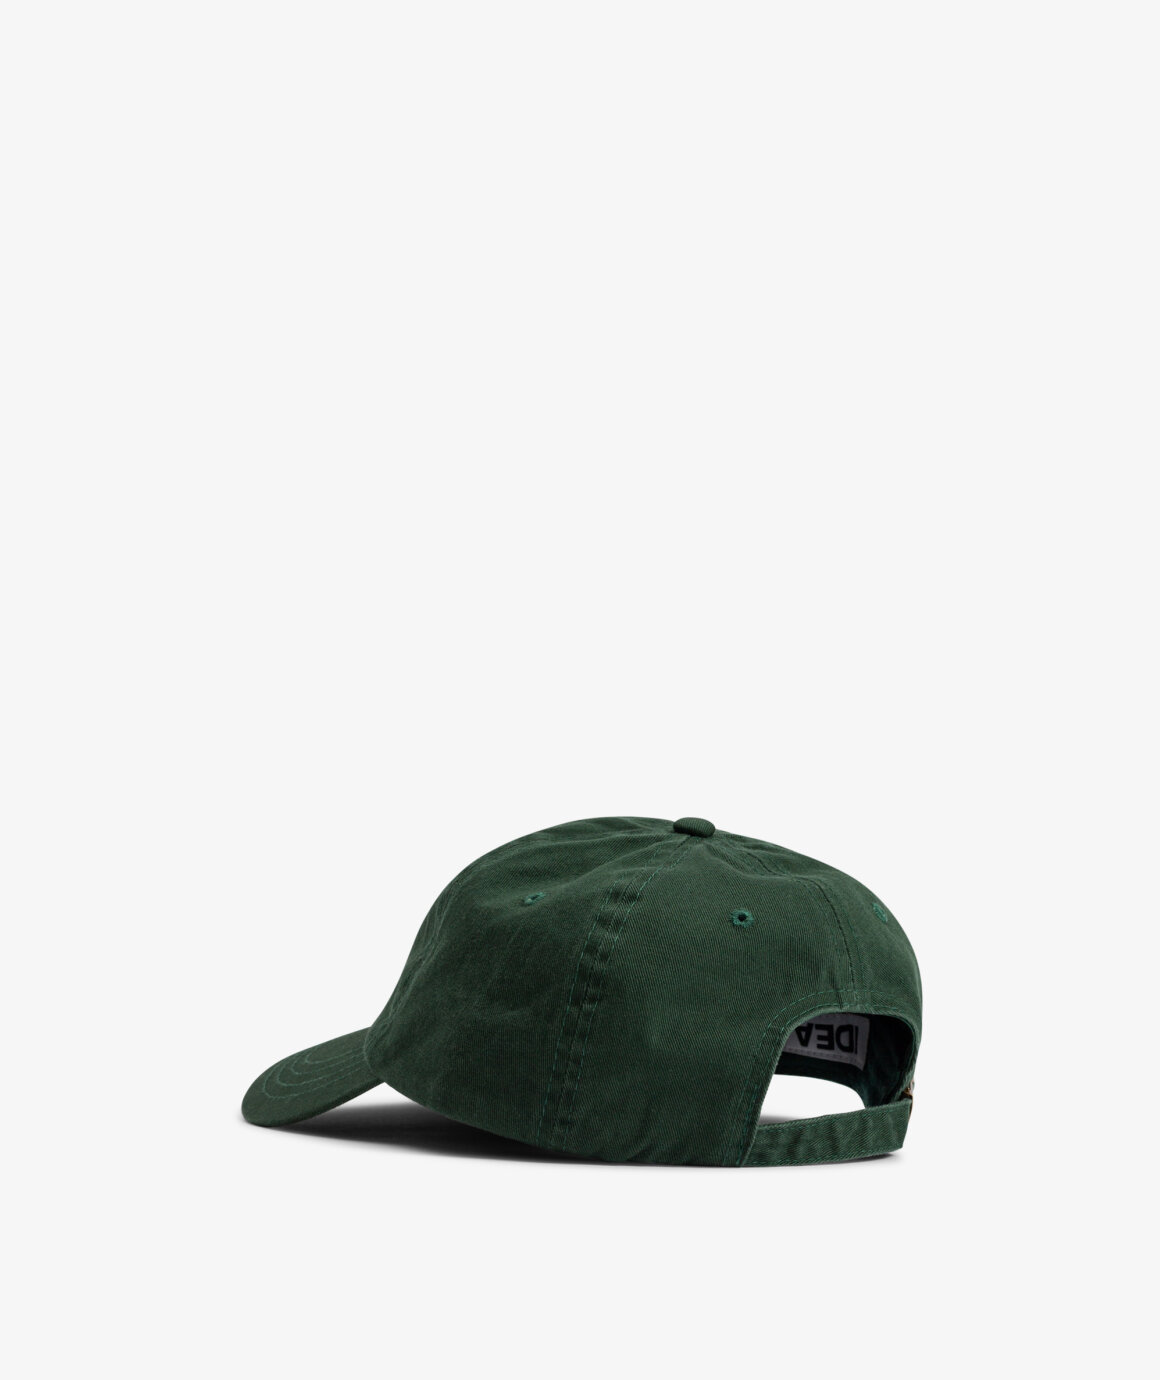 Norse Store | Shipping Worldwide - IDEA Plant Seeds Cap - Green